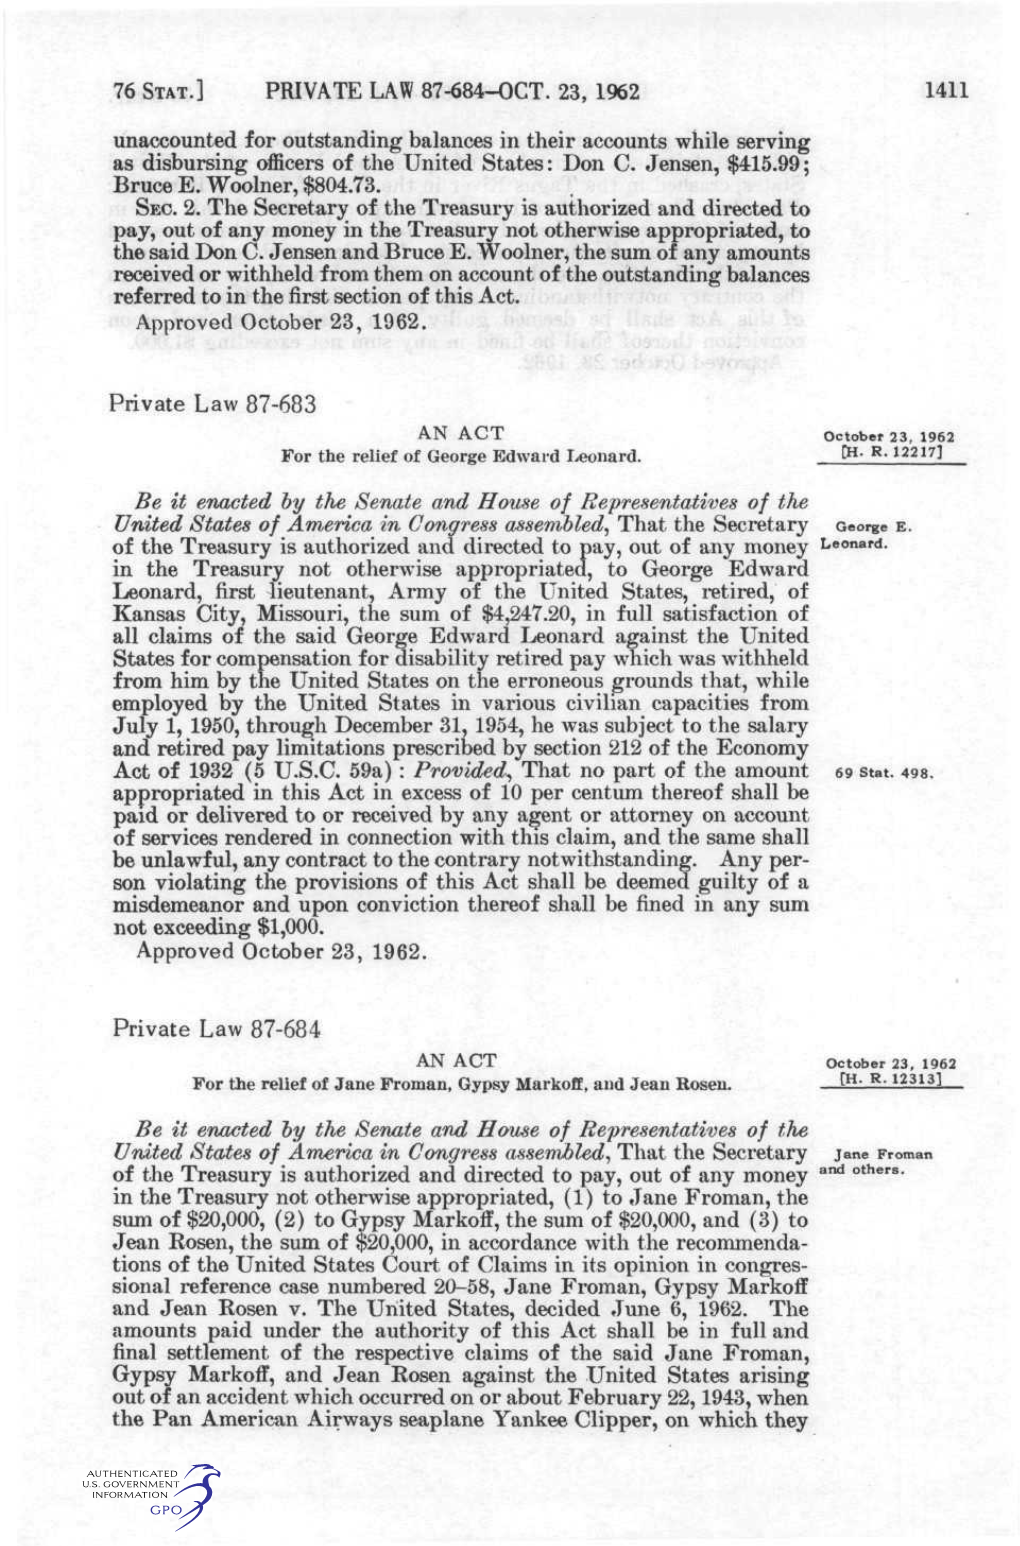 PRIVATE LAW 87-684-OCT. 23, 1962 1411 Unaccounted for Outstanding Balances in Their Accounts While Serving As Disbursing Officers of the United States: Don C